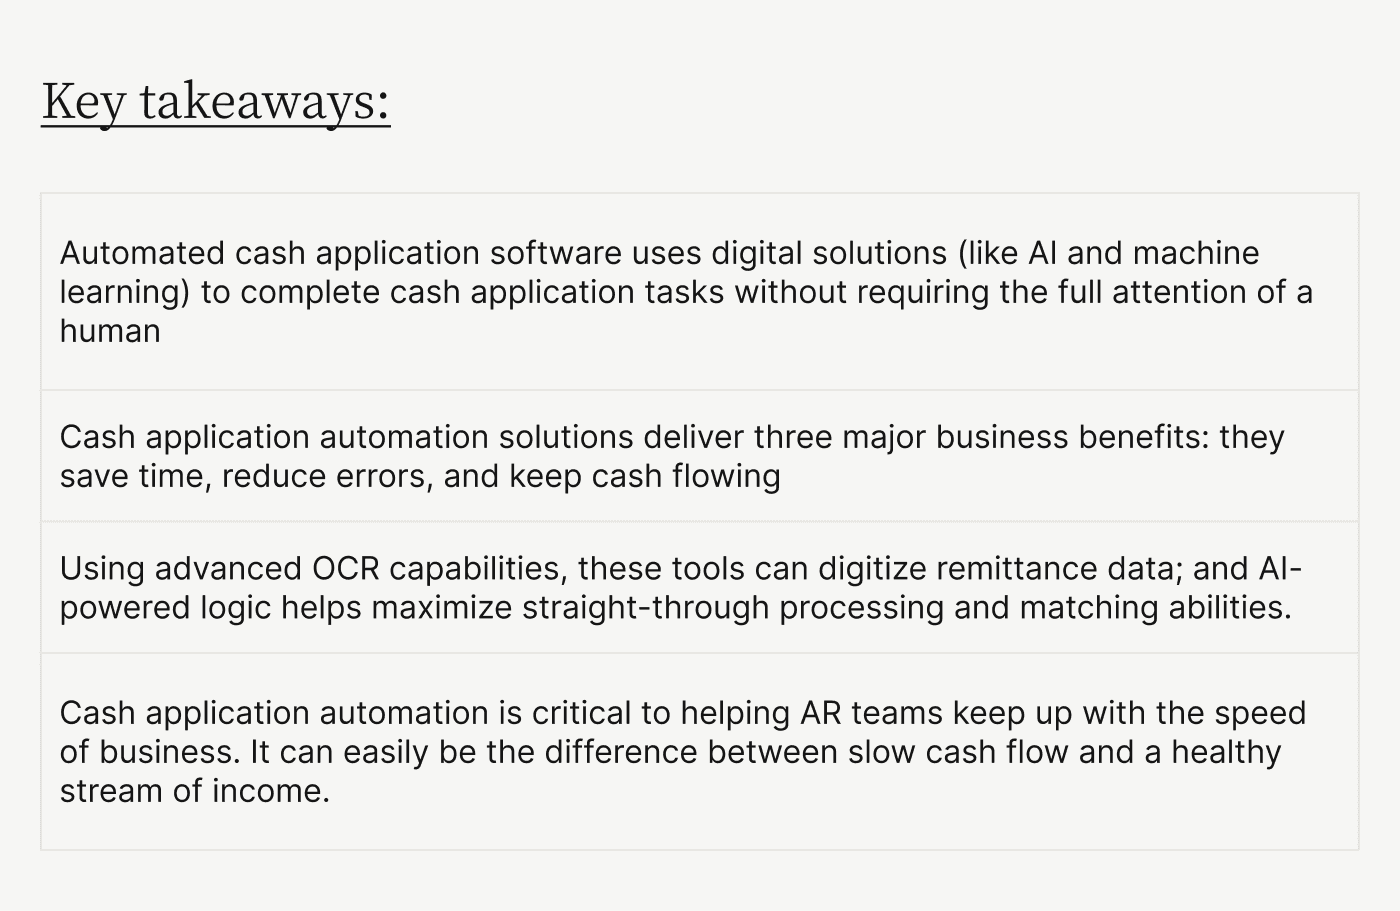 Key takeaways: guide to cash application automation software